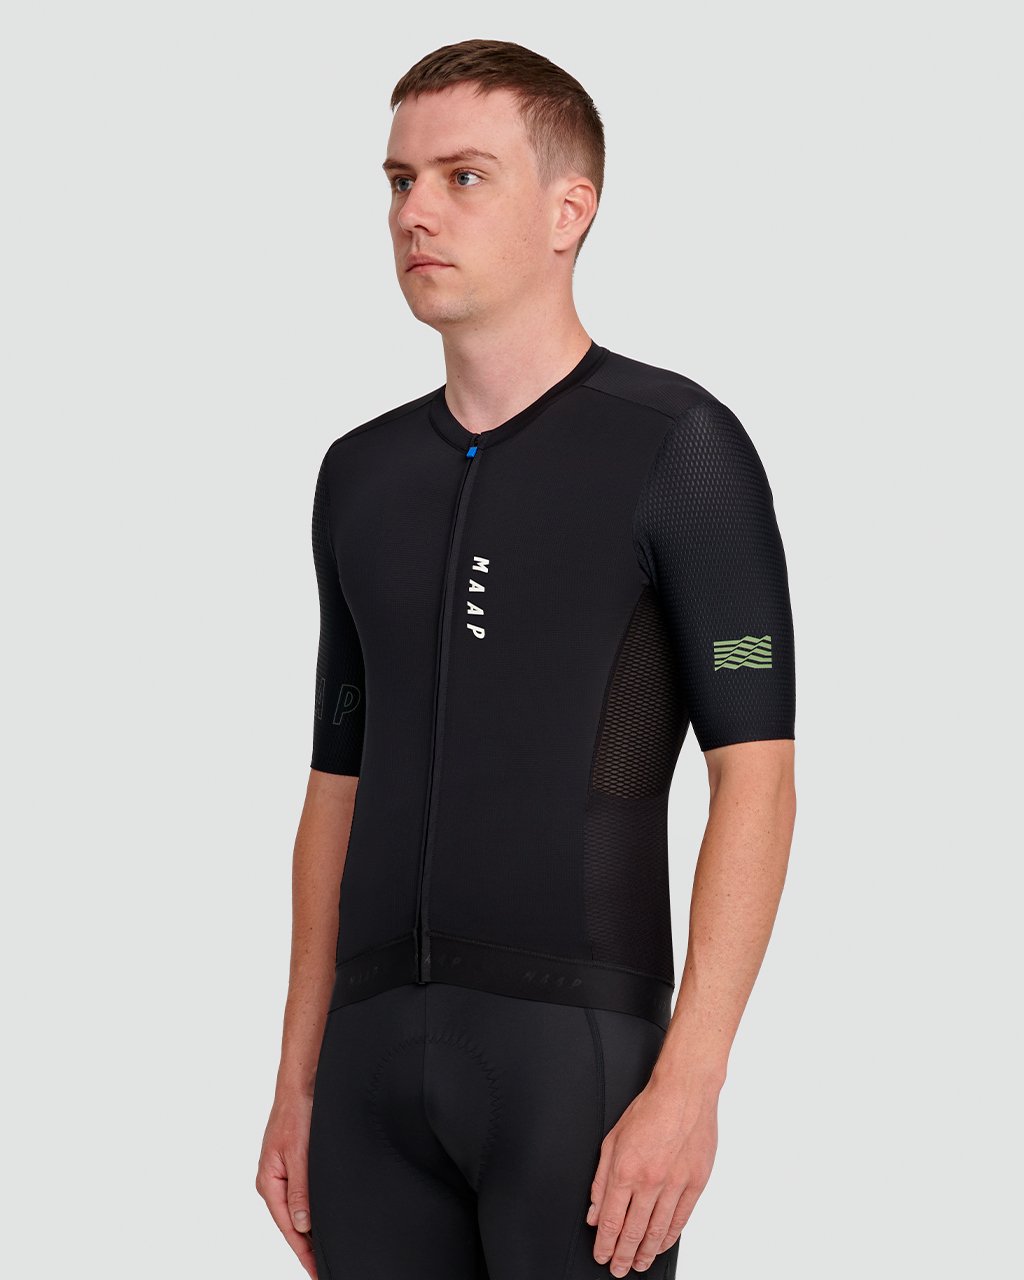 Stealth Race Fit Jersey - MAAP Cycling Apparel